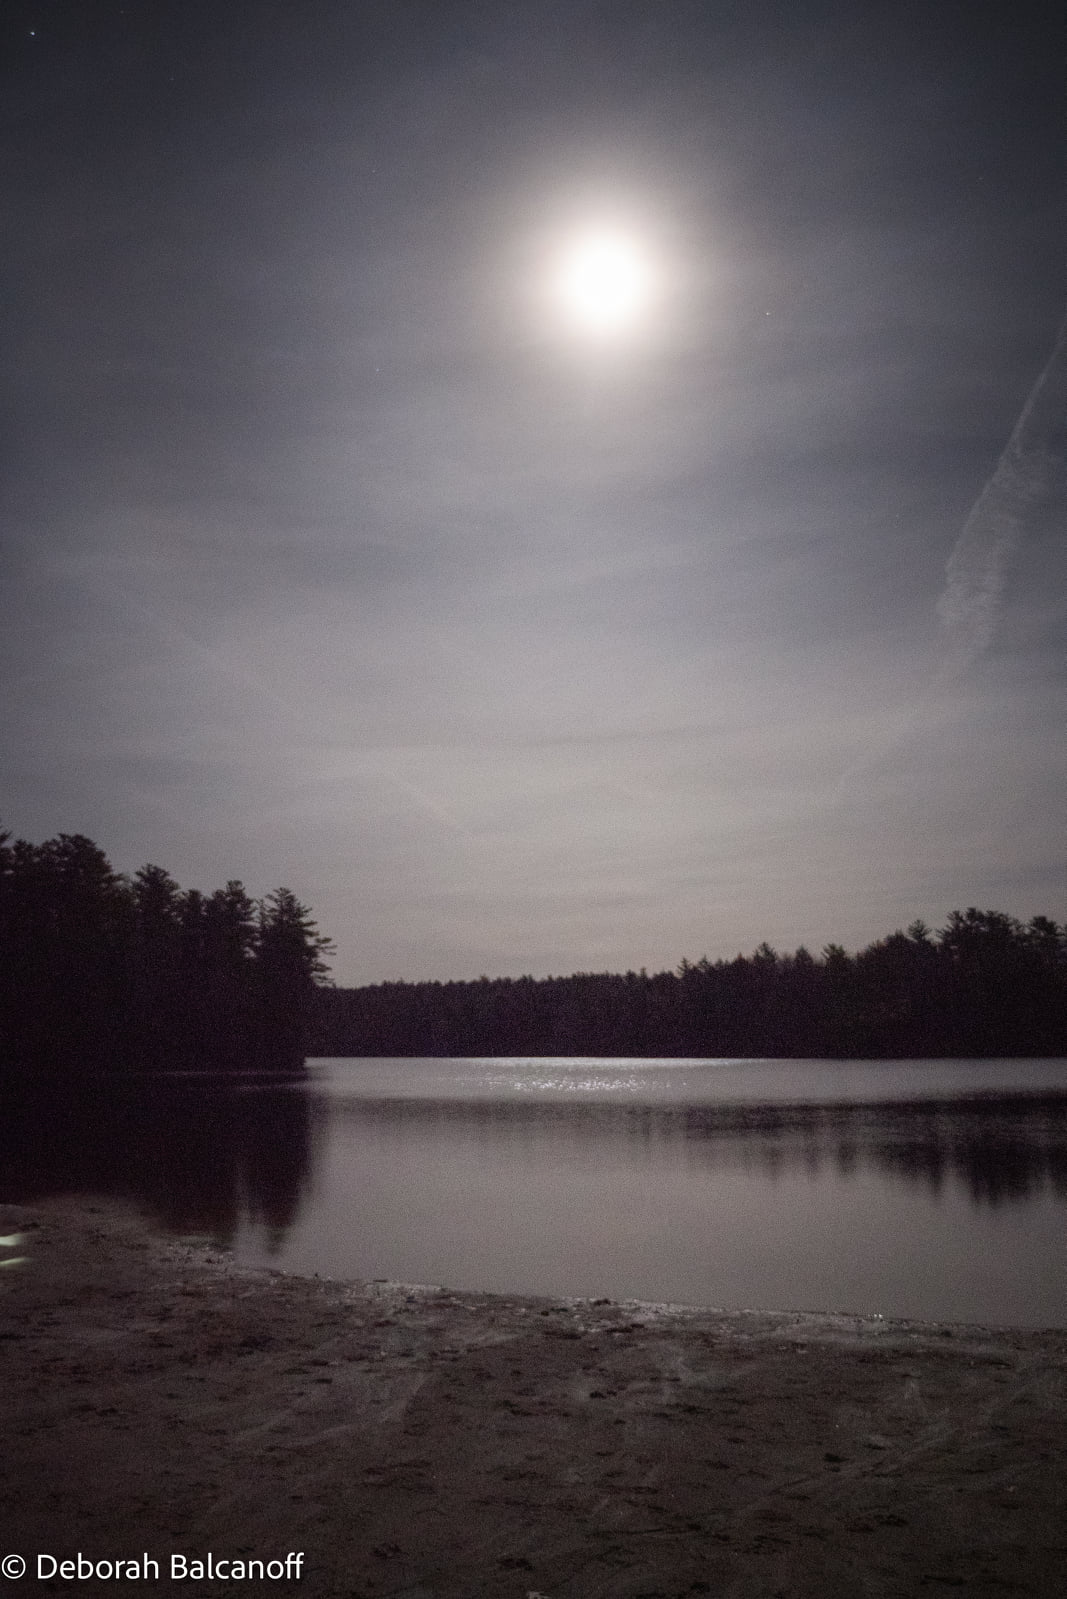 Full Moon Over Lakeside Cabin Wallpapers